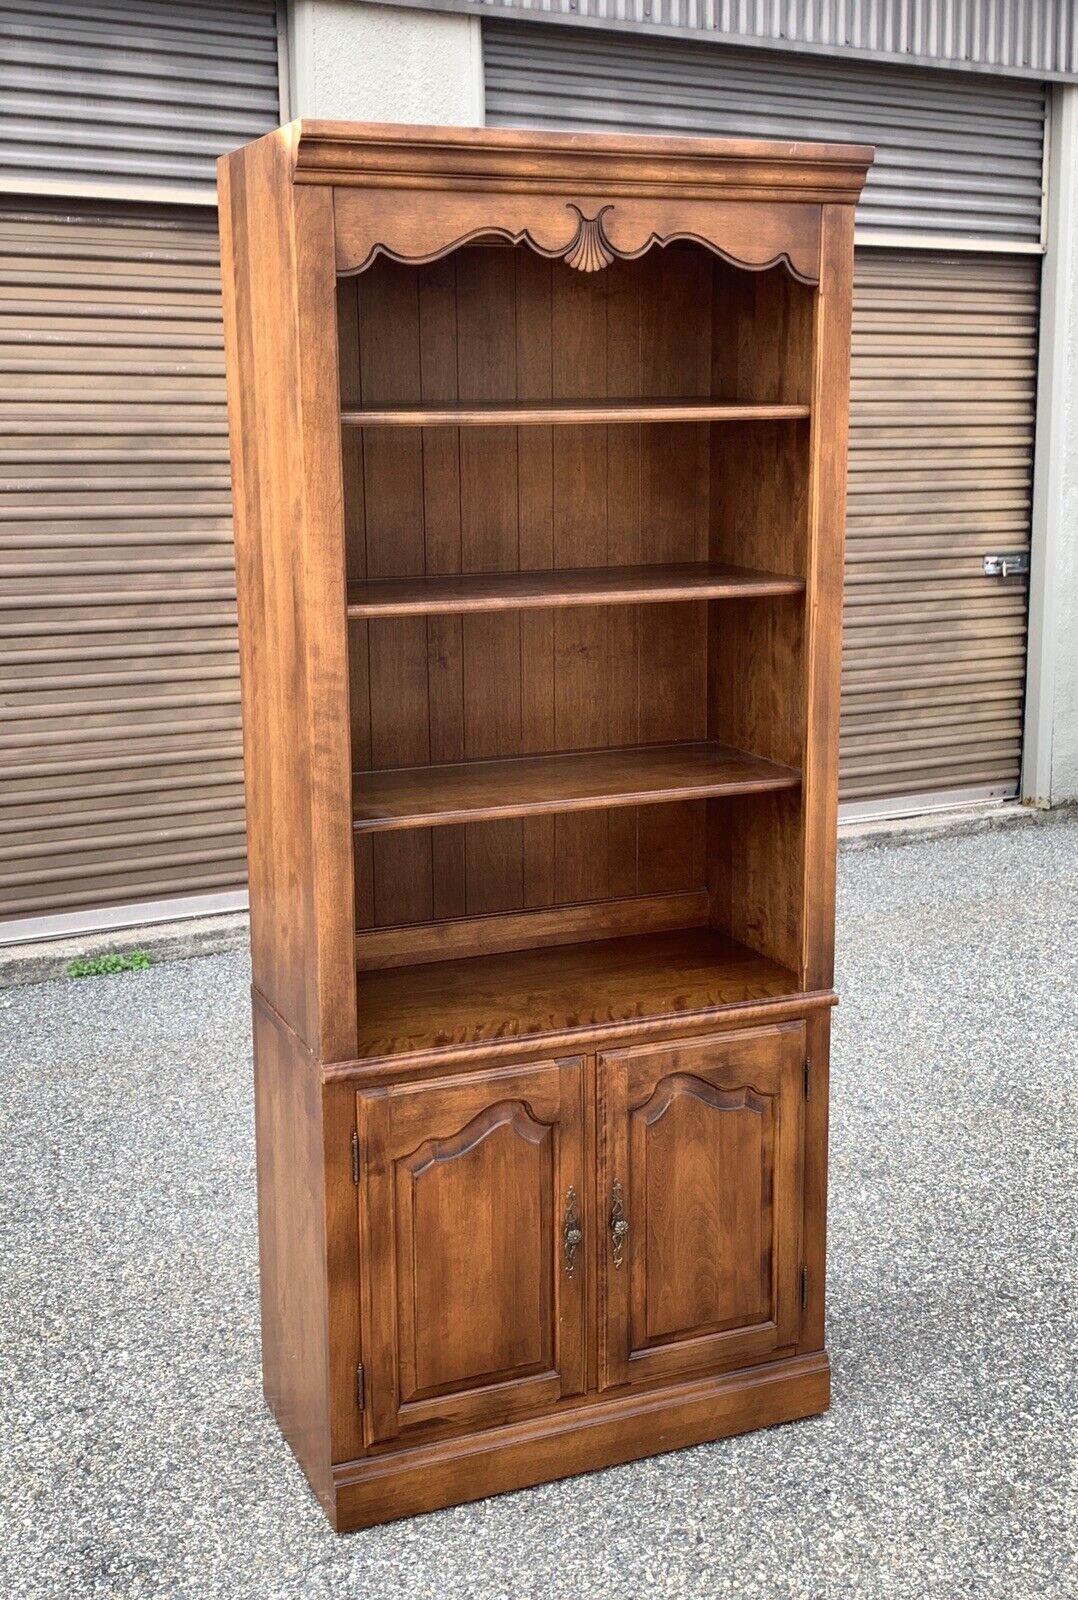 Beautiful Ethan Allen Country French Bookcase Cabinet #26-9312 9310  #236 Birch